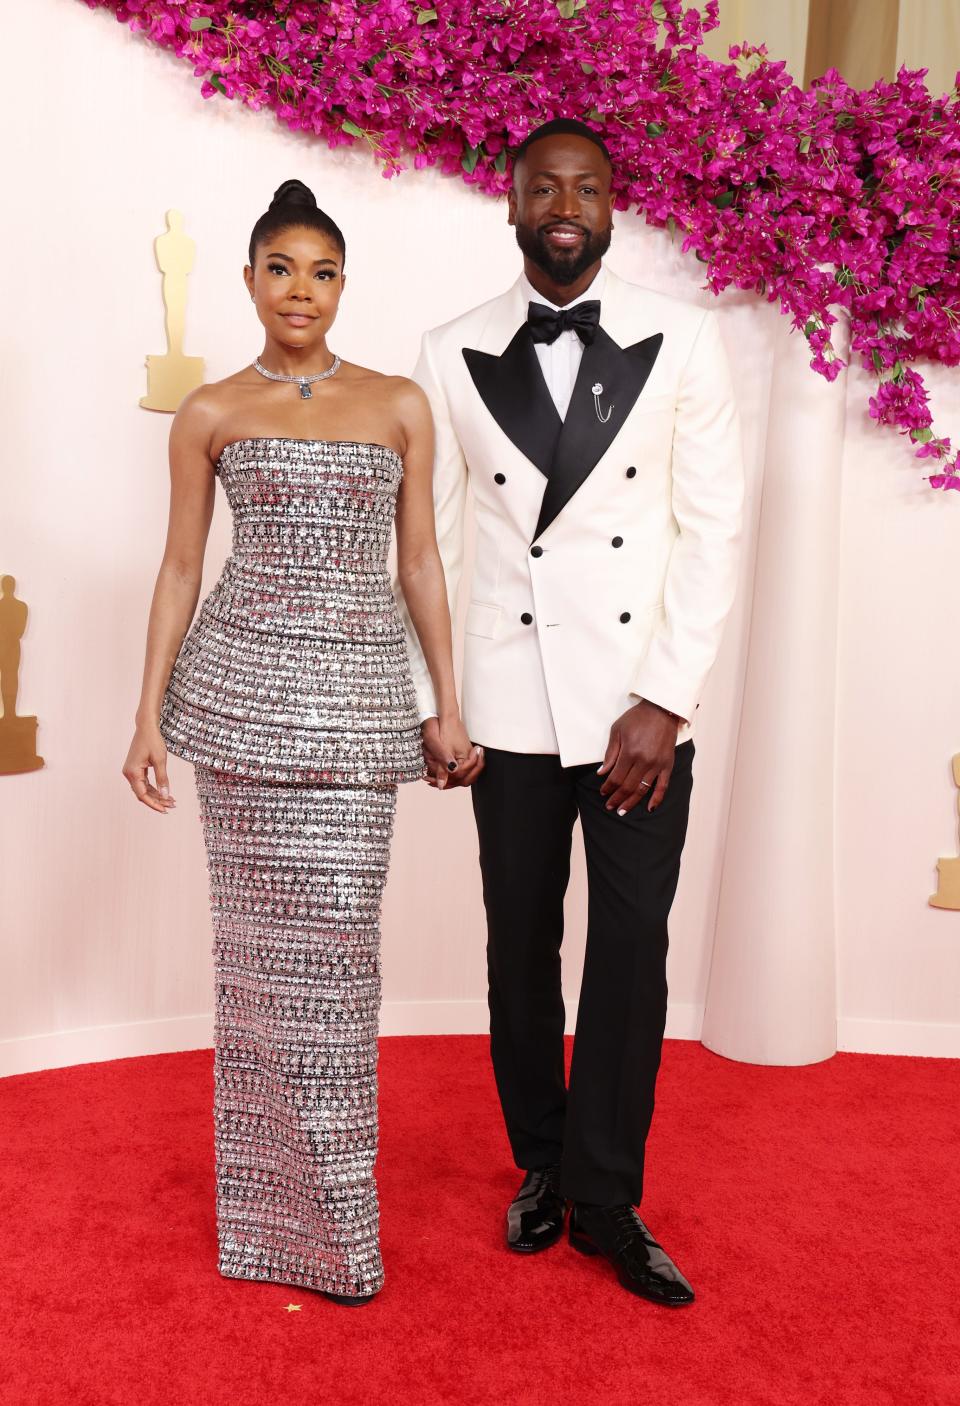 Gabrielle Union-Wade and Dwyane Wade attend the 96th Annual Academy Awards on March 10.